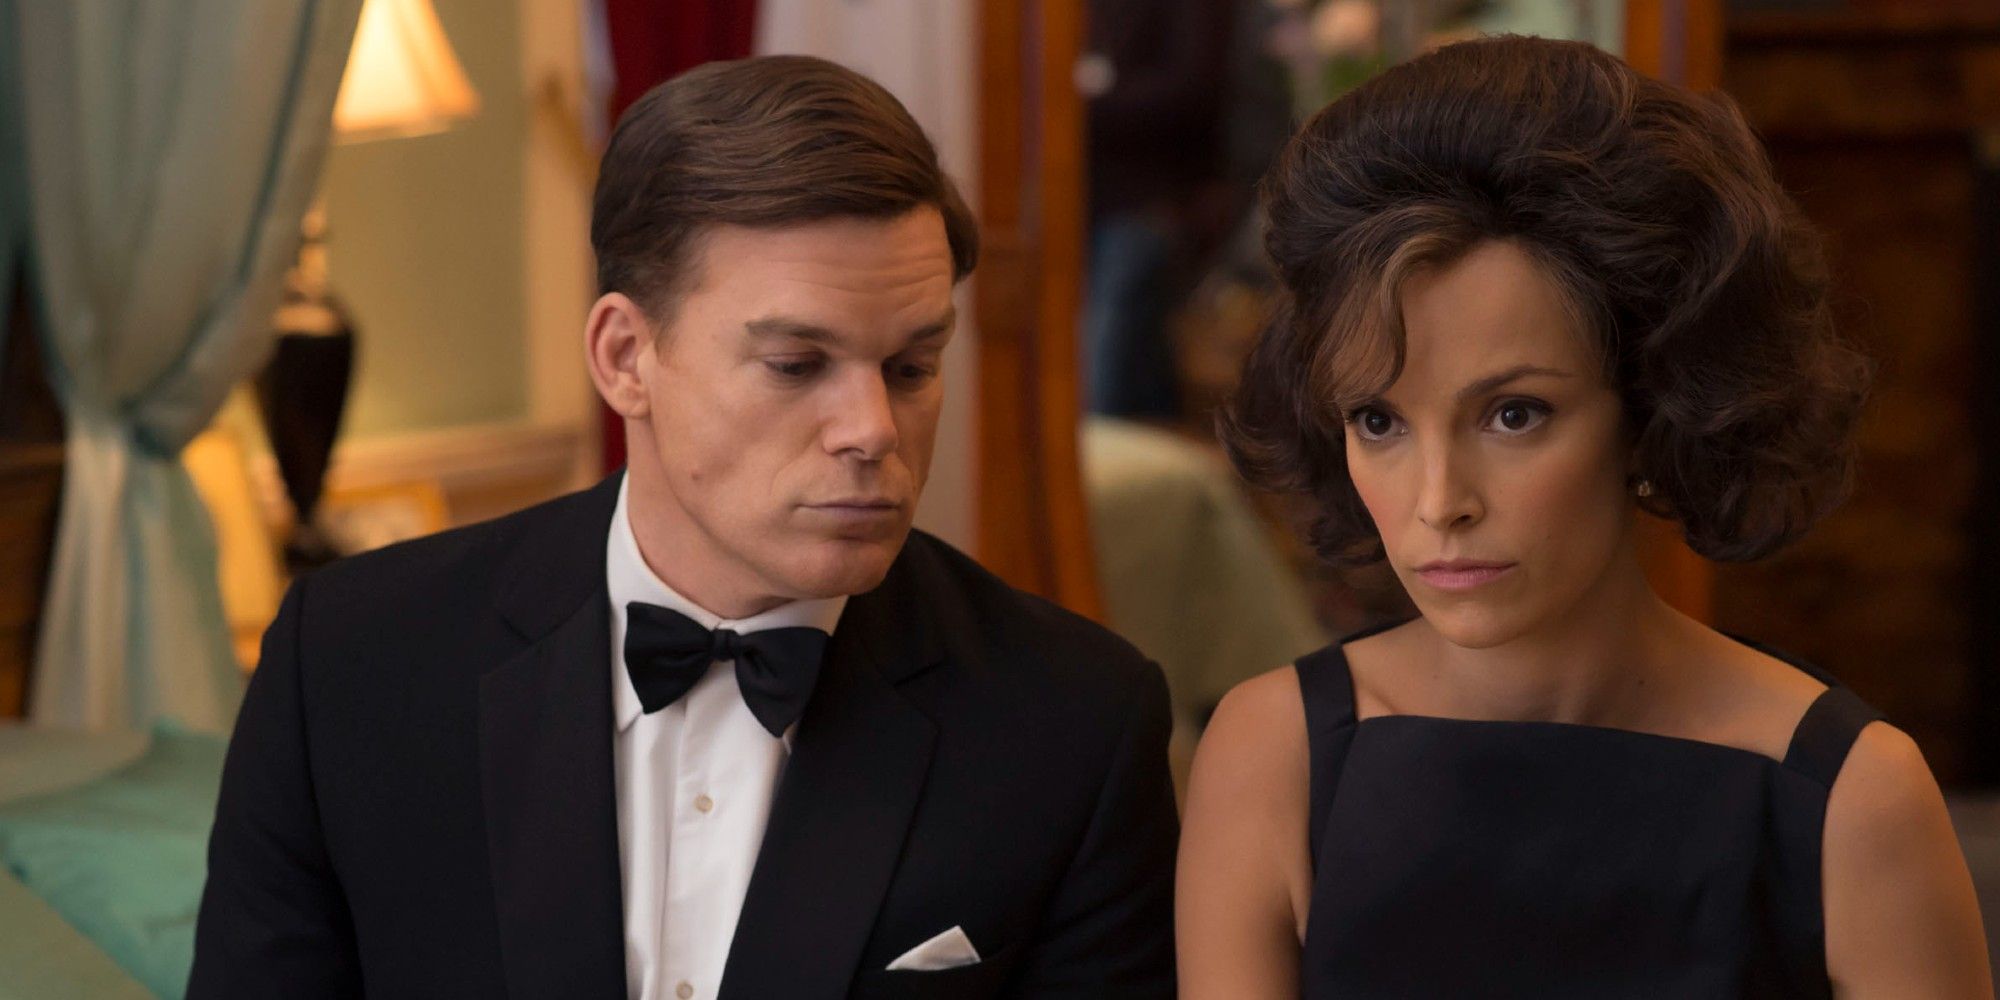 Michael C Hall and Jodi Balfour in The Crown